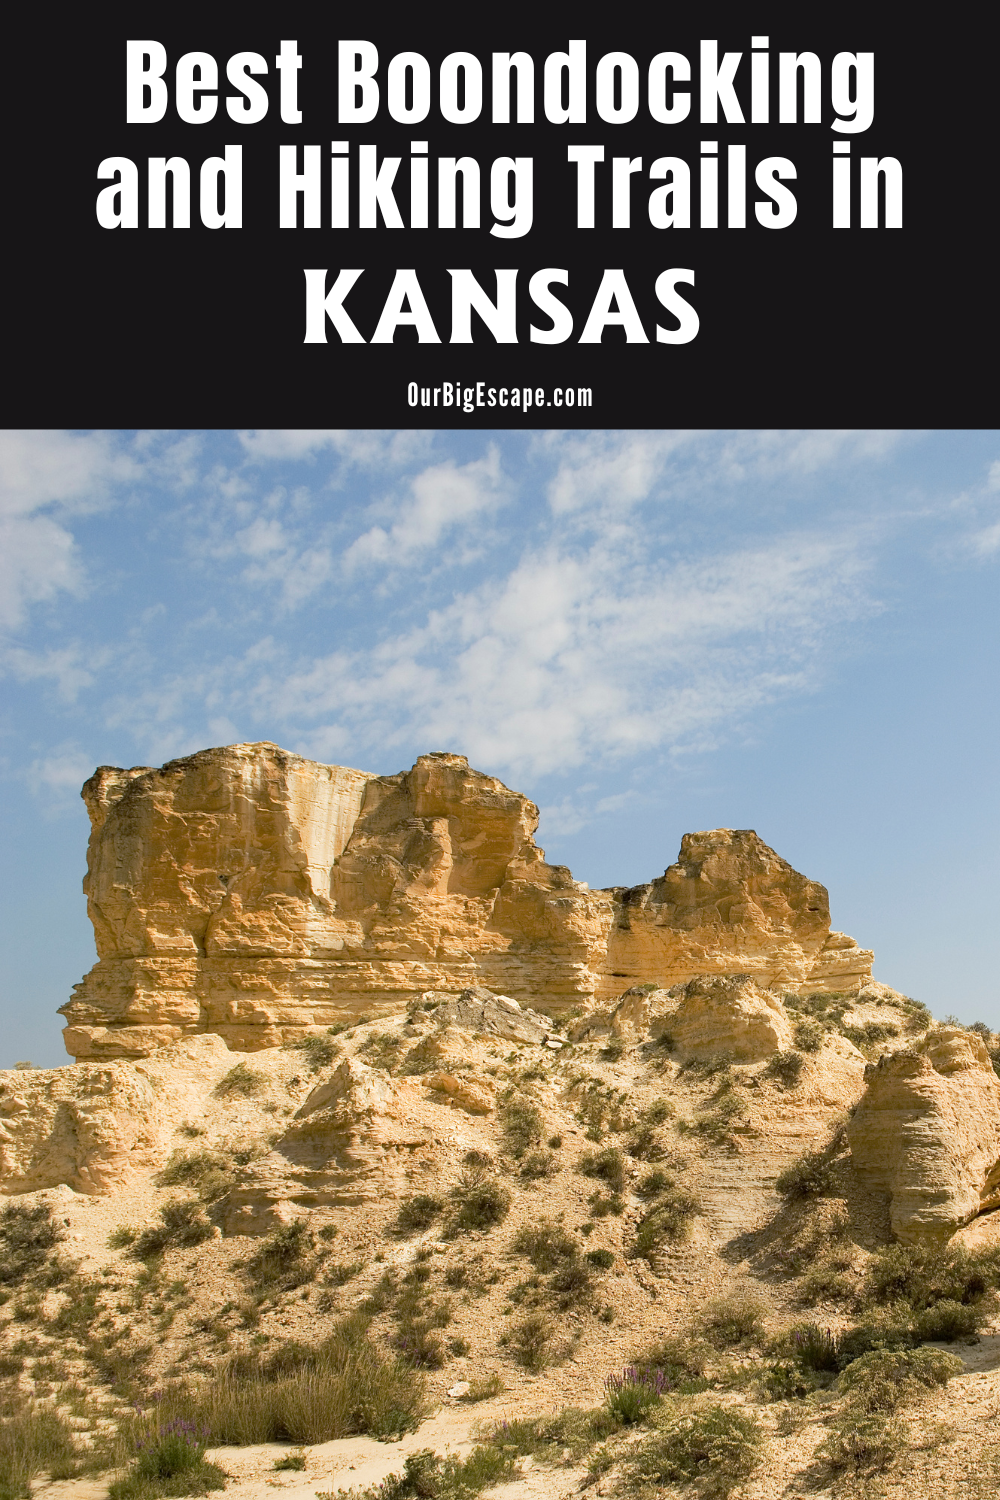 Best Boondocking and Hiking Trails in Kansas